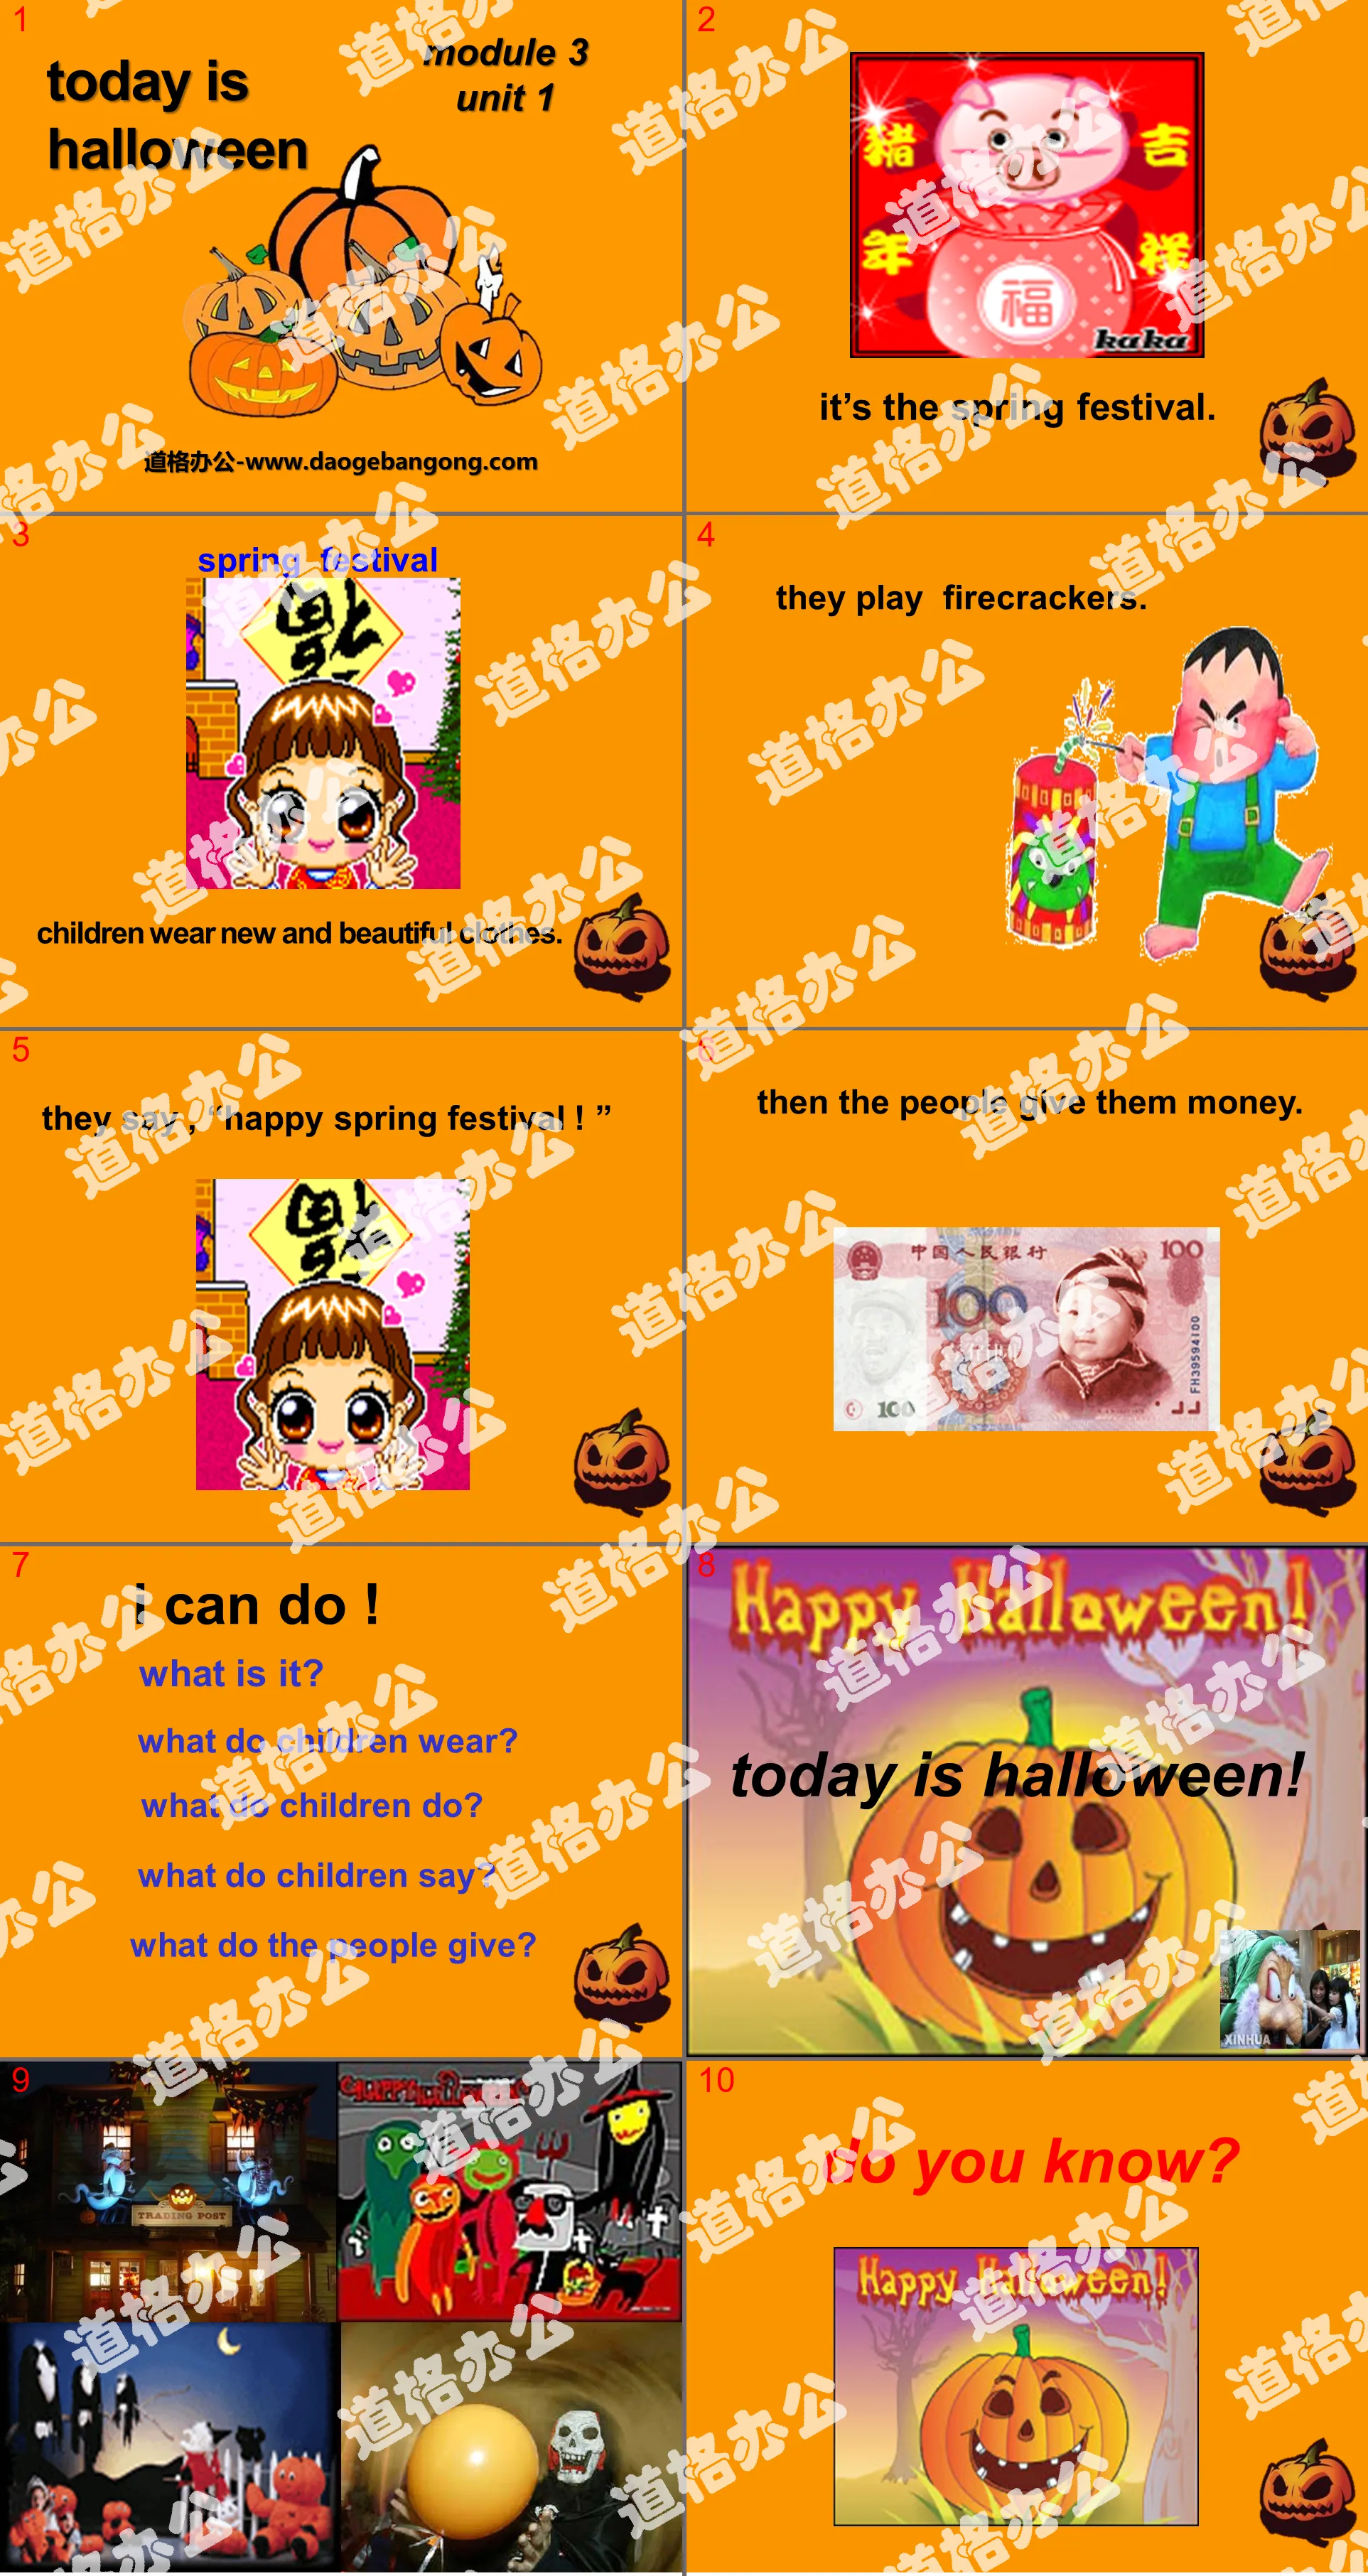 《Today is Halloween》PPT课件5
